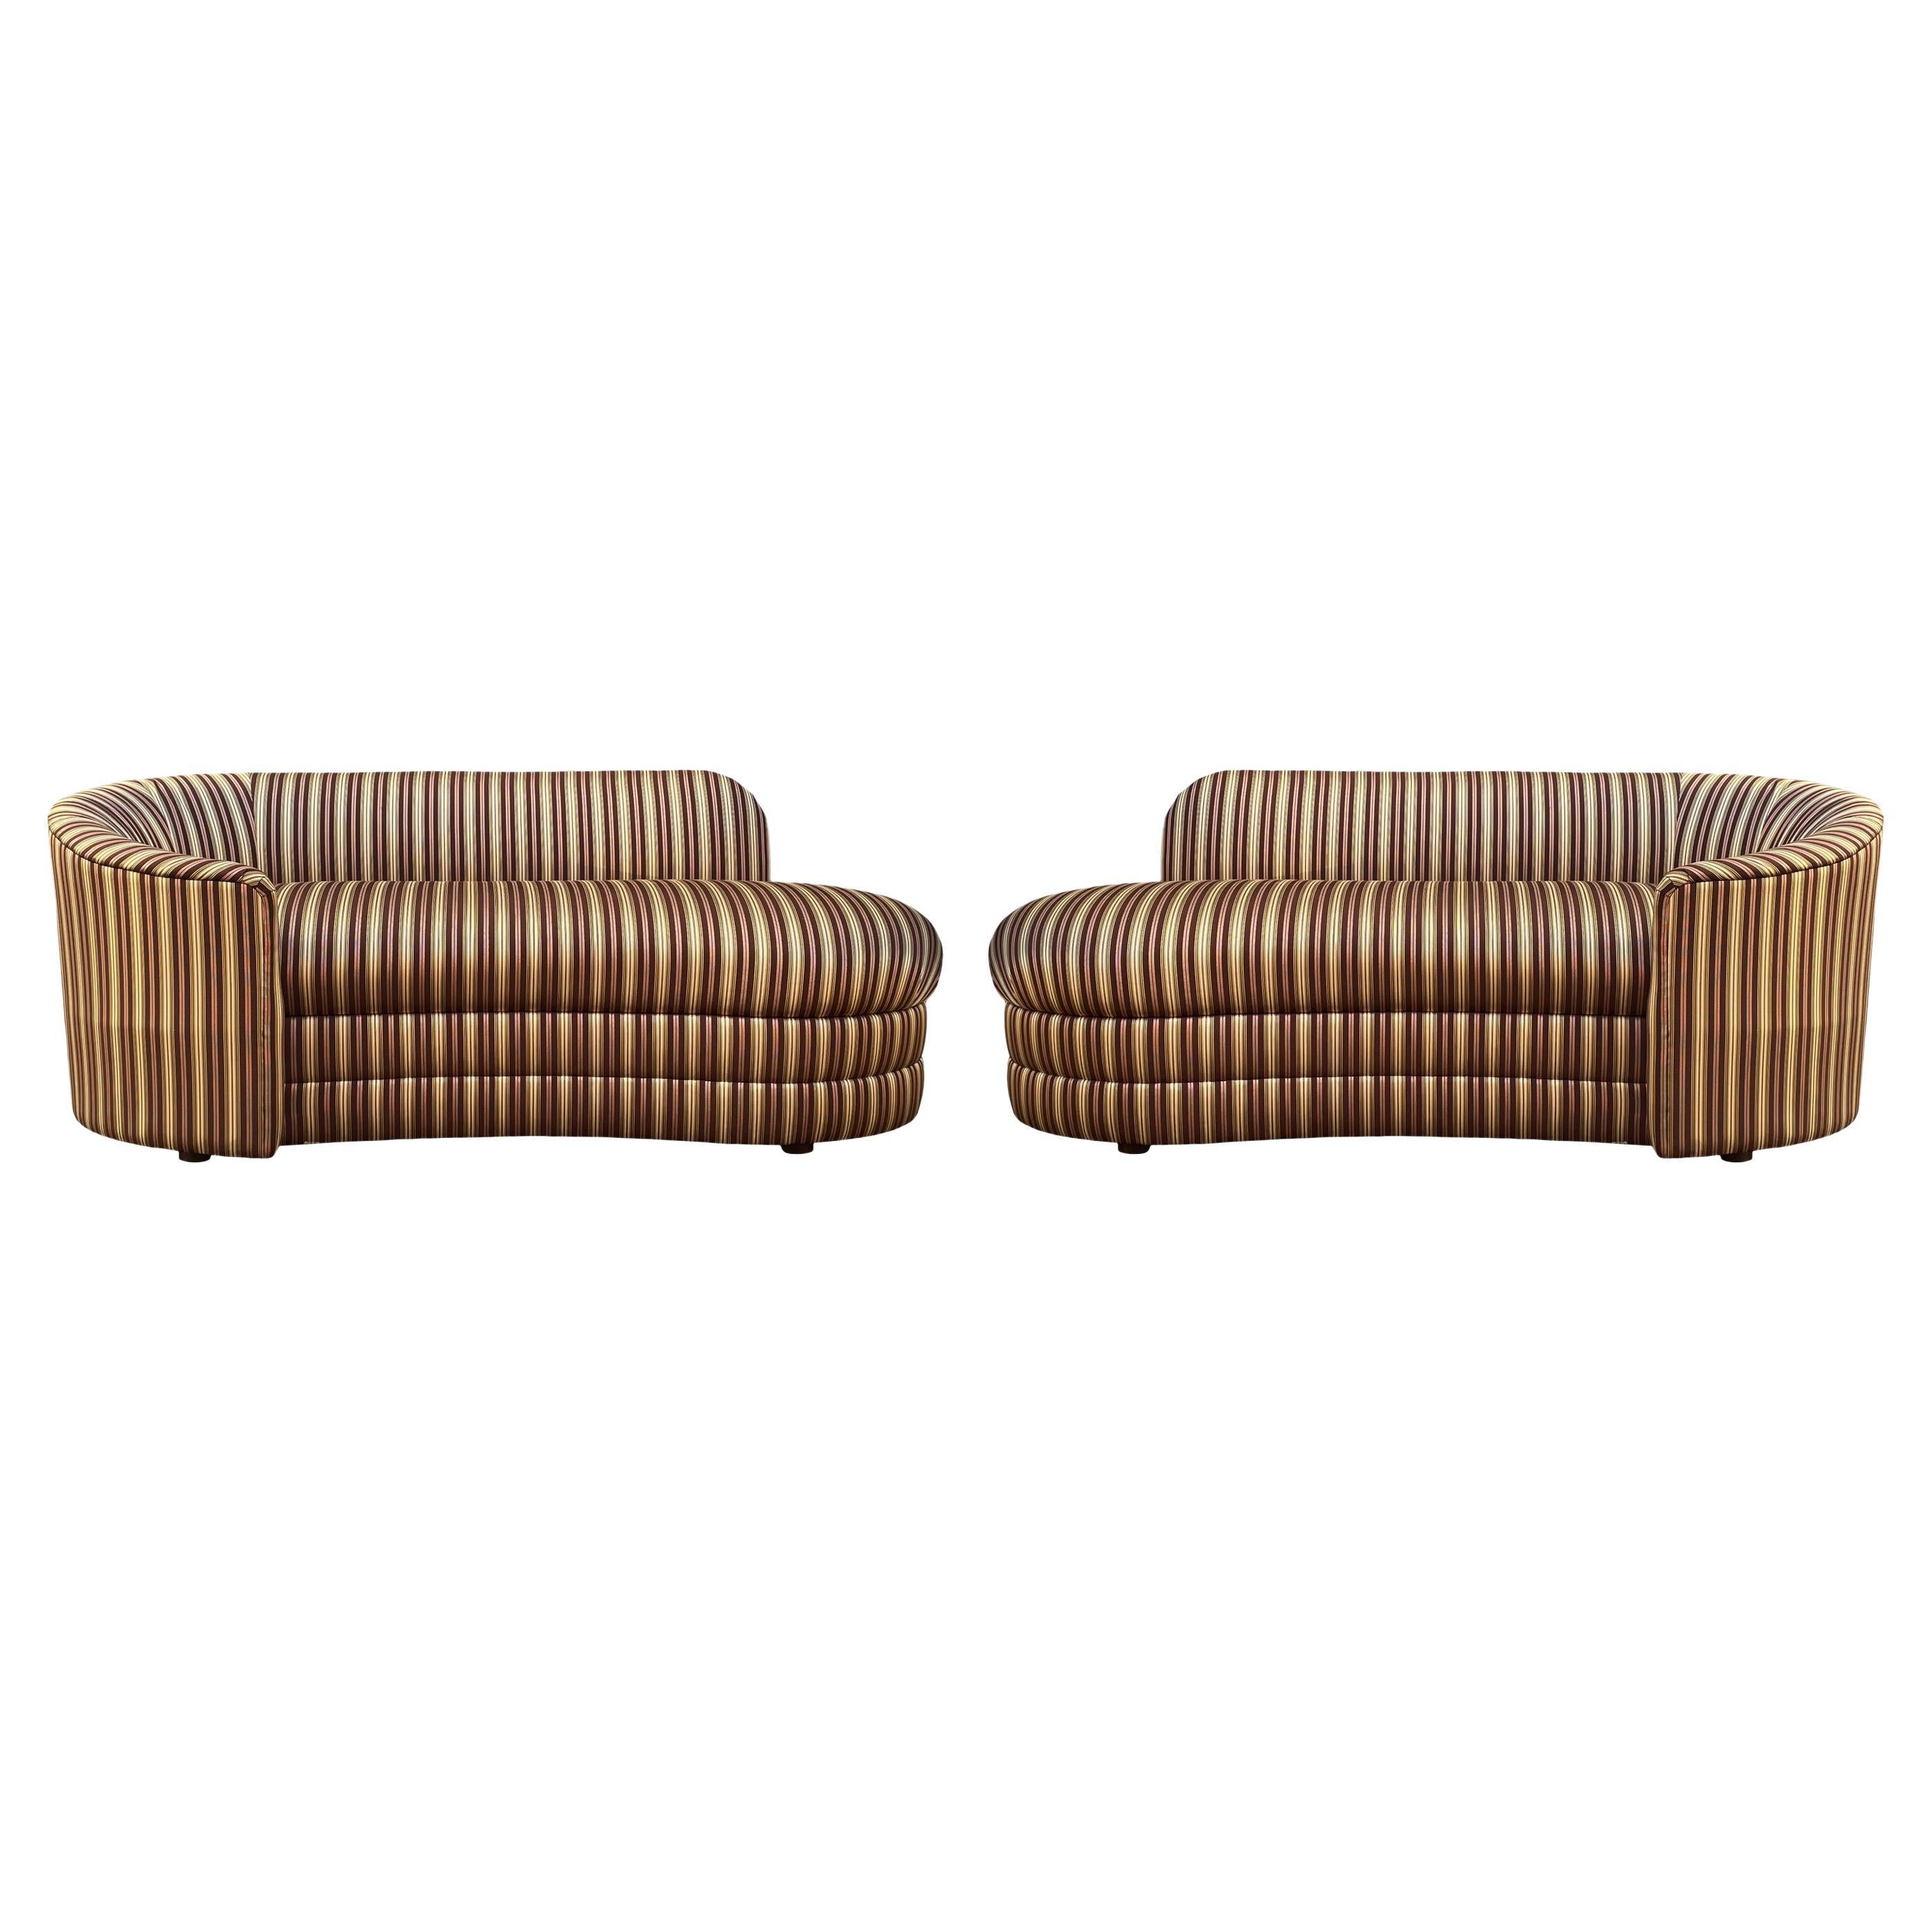 Pair of Hollywood Regency Opposing Curved Chaise Lounges, Sofas or Loveseats  For Sale